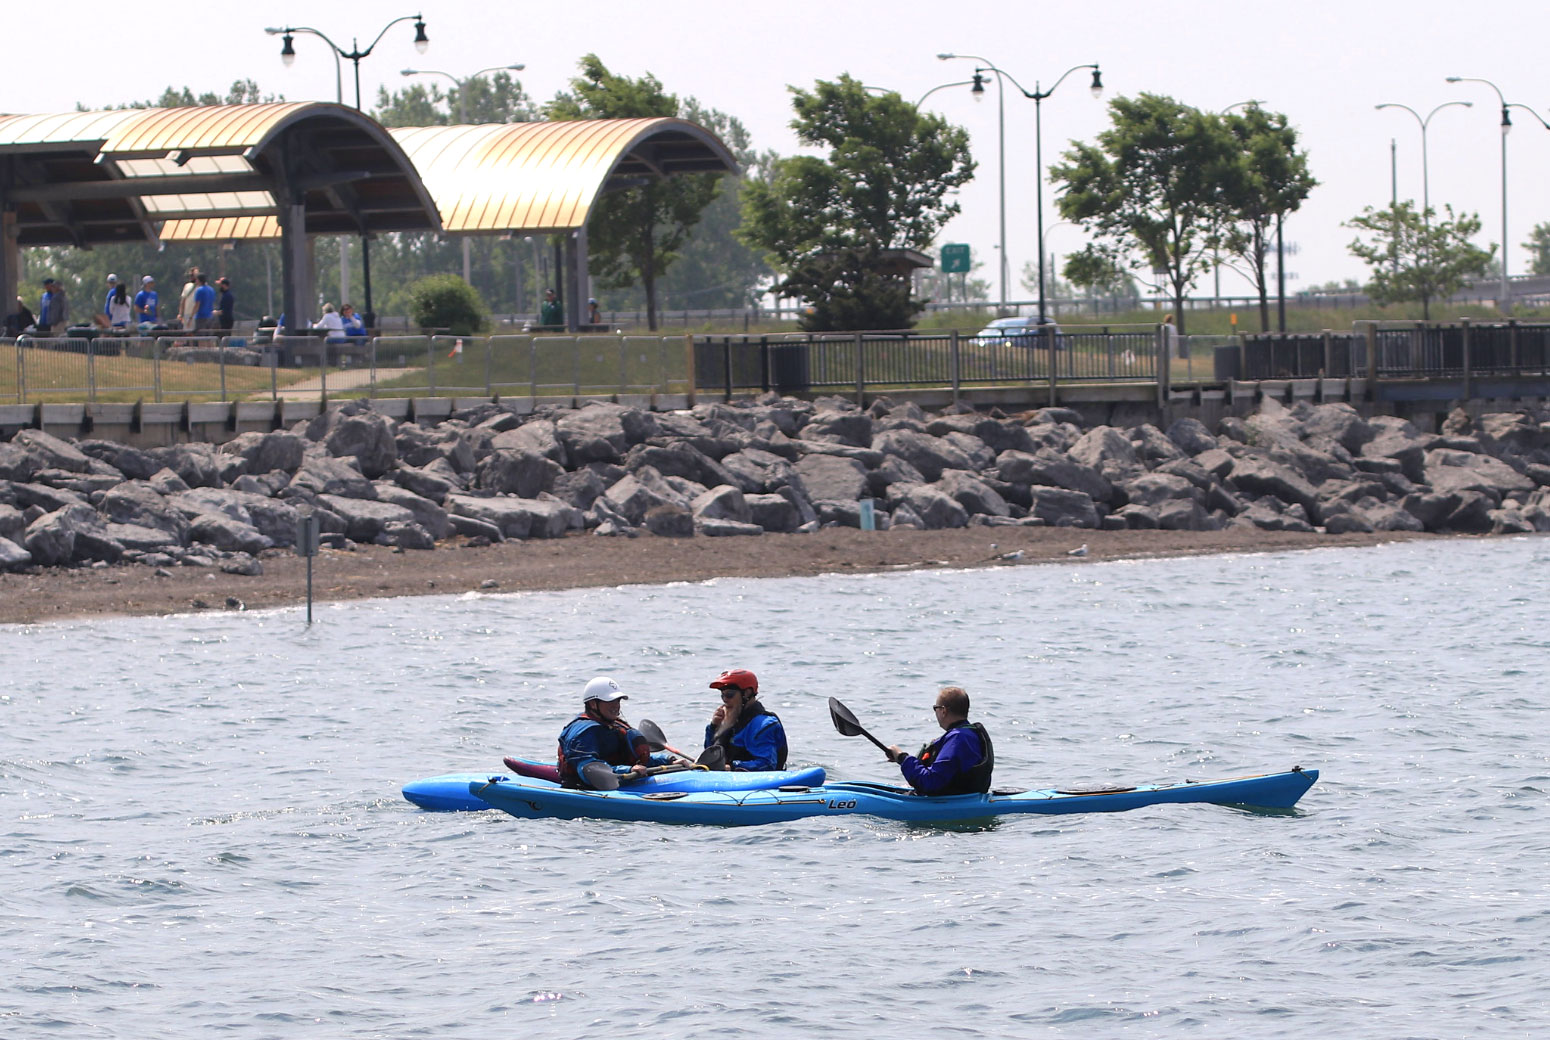 Three kayakers in the water in front of an outdoor event pavilion.